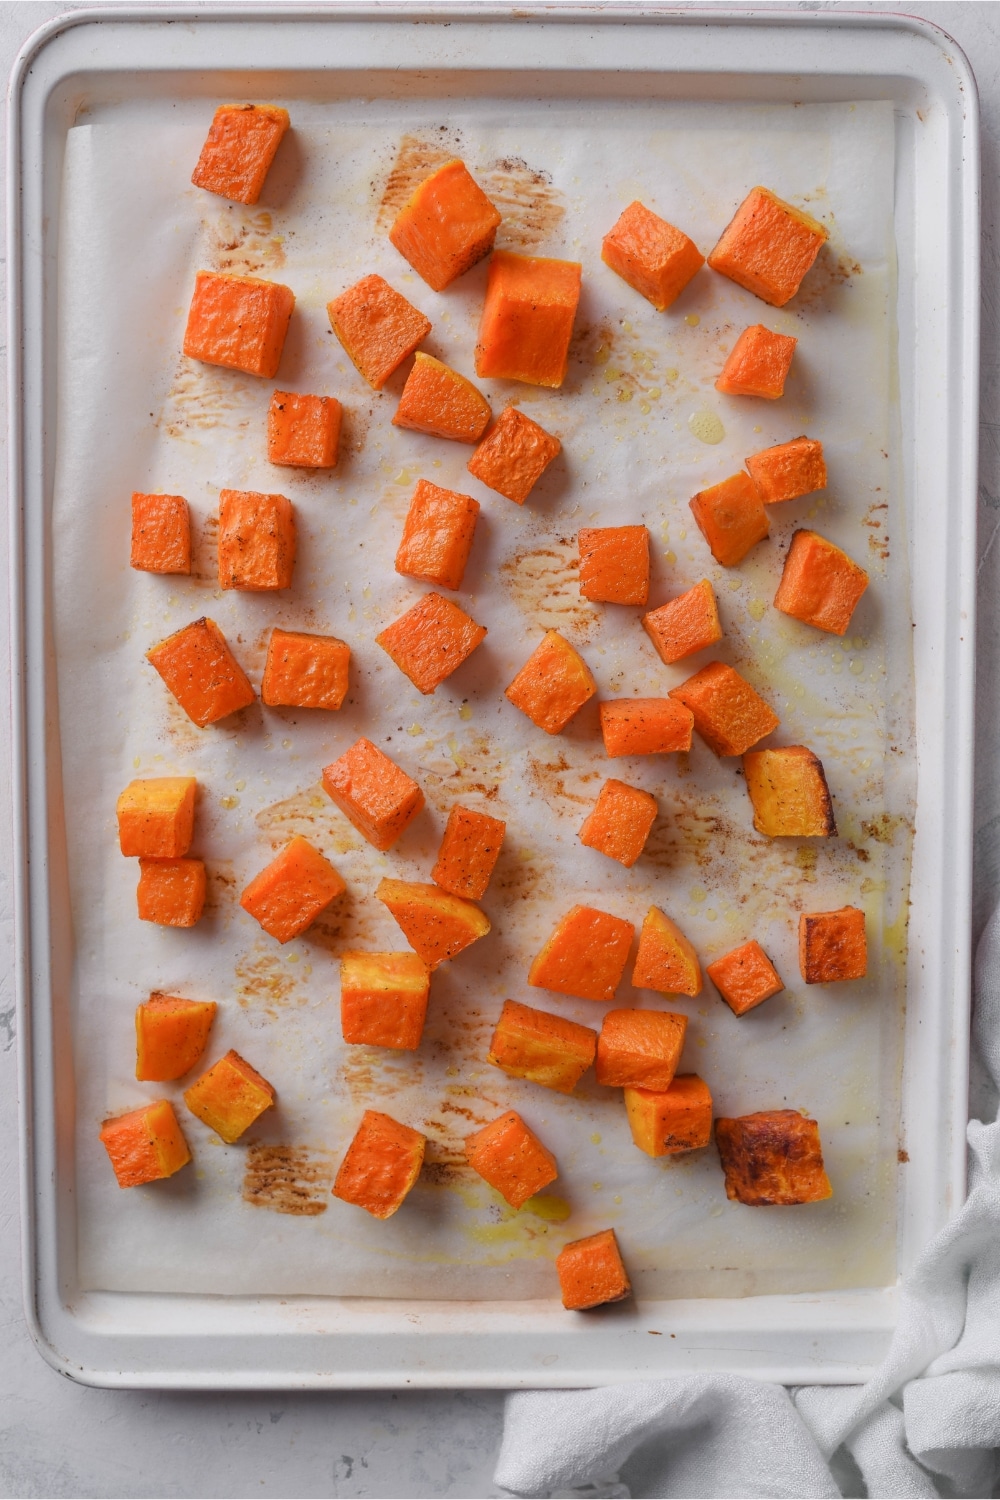 Roasted butternut squash cubes spread out on a parchment paper-lined baking sheet.